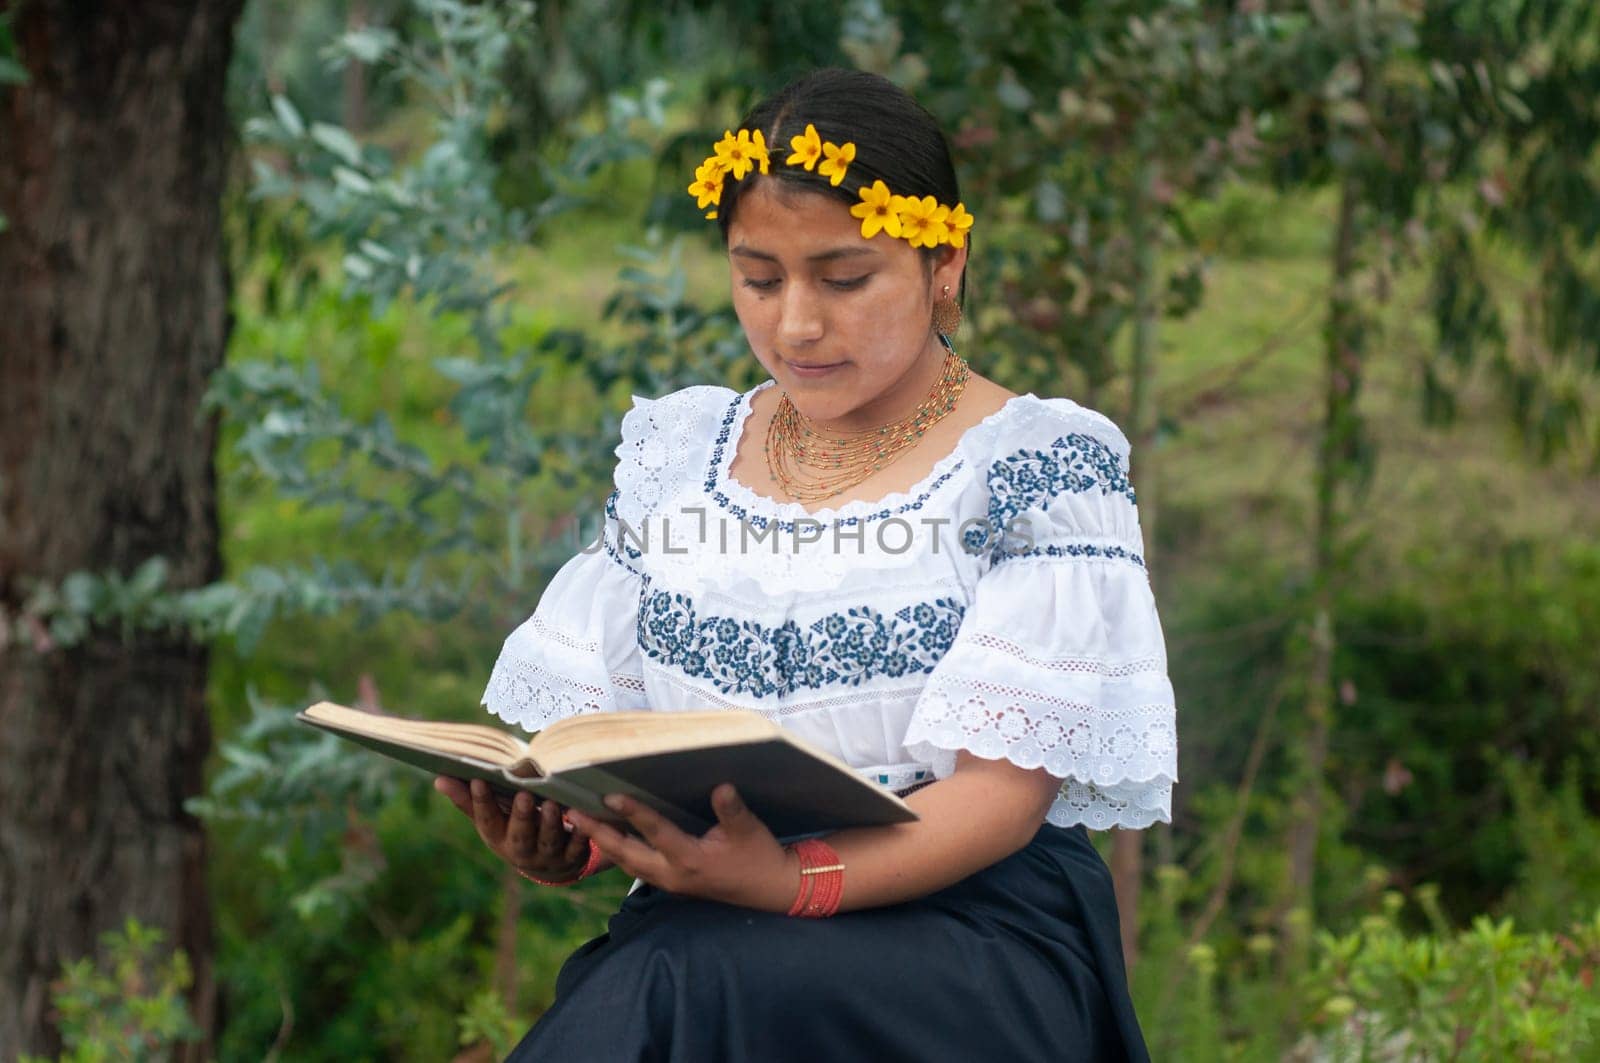 A captivating image of a woman in a flowing dress, completely engrossed in reading an unidentified book. by Raulmartin